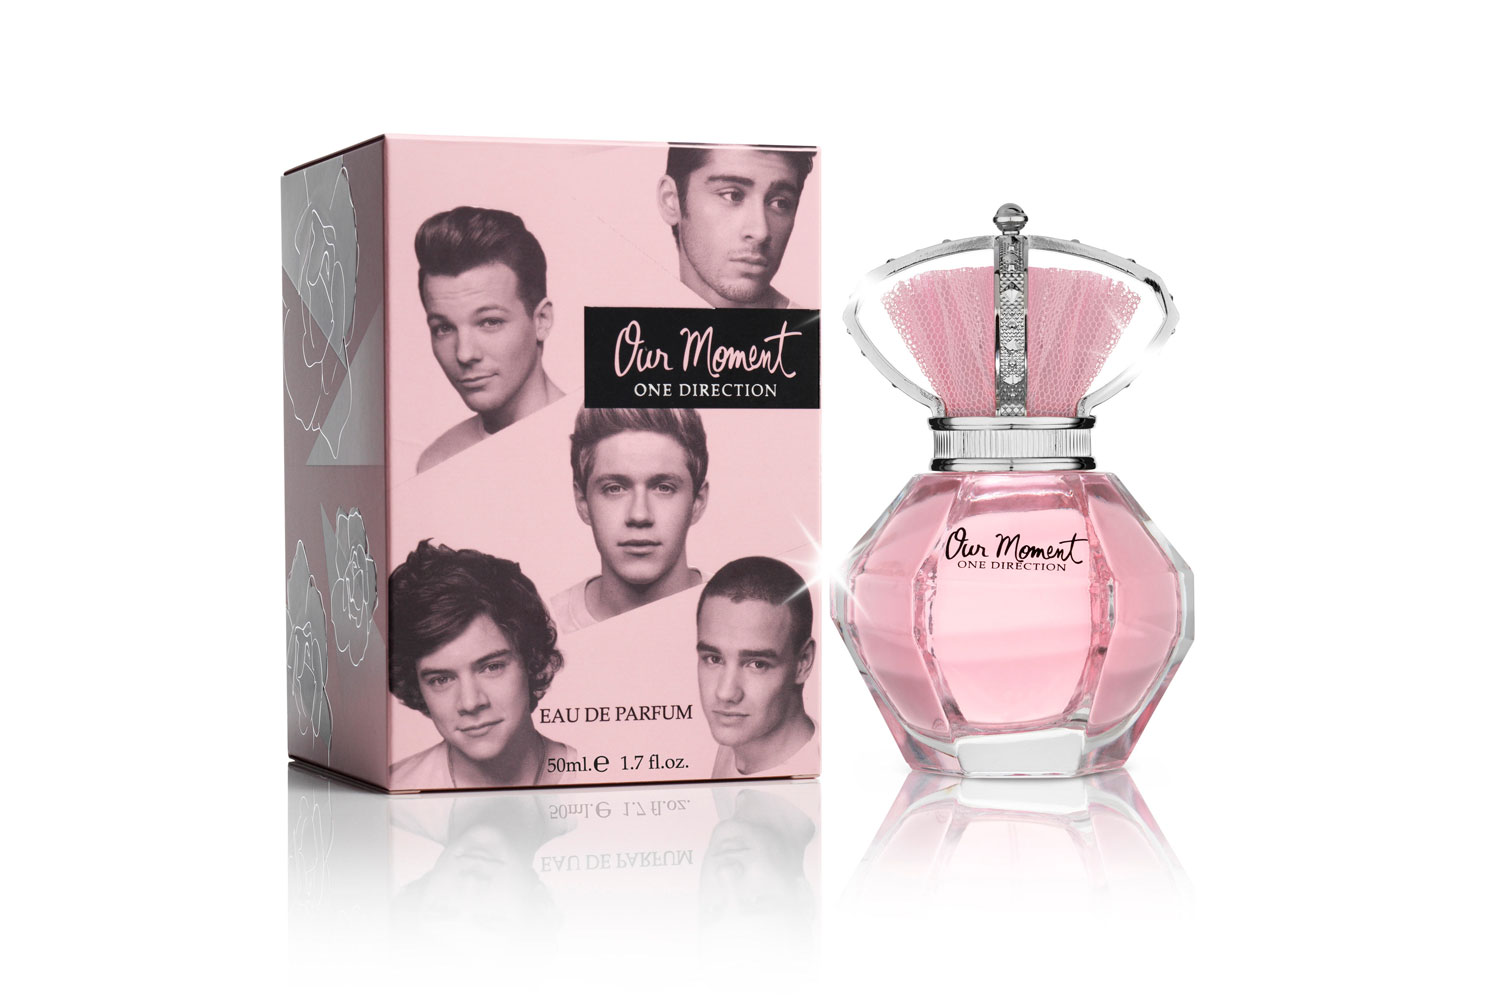 Release of the One Direction fragrance